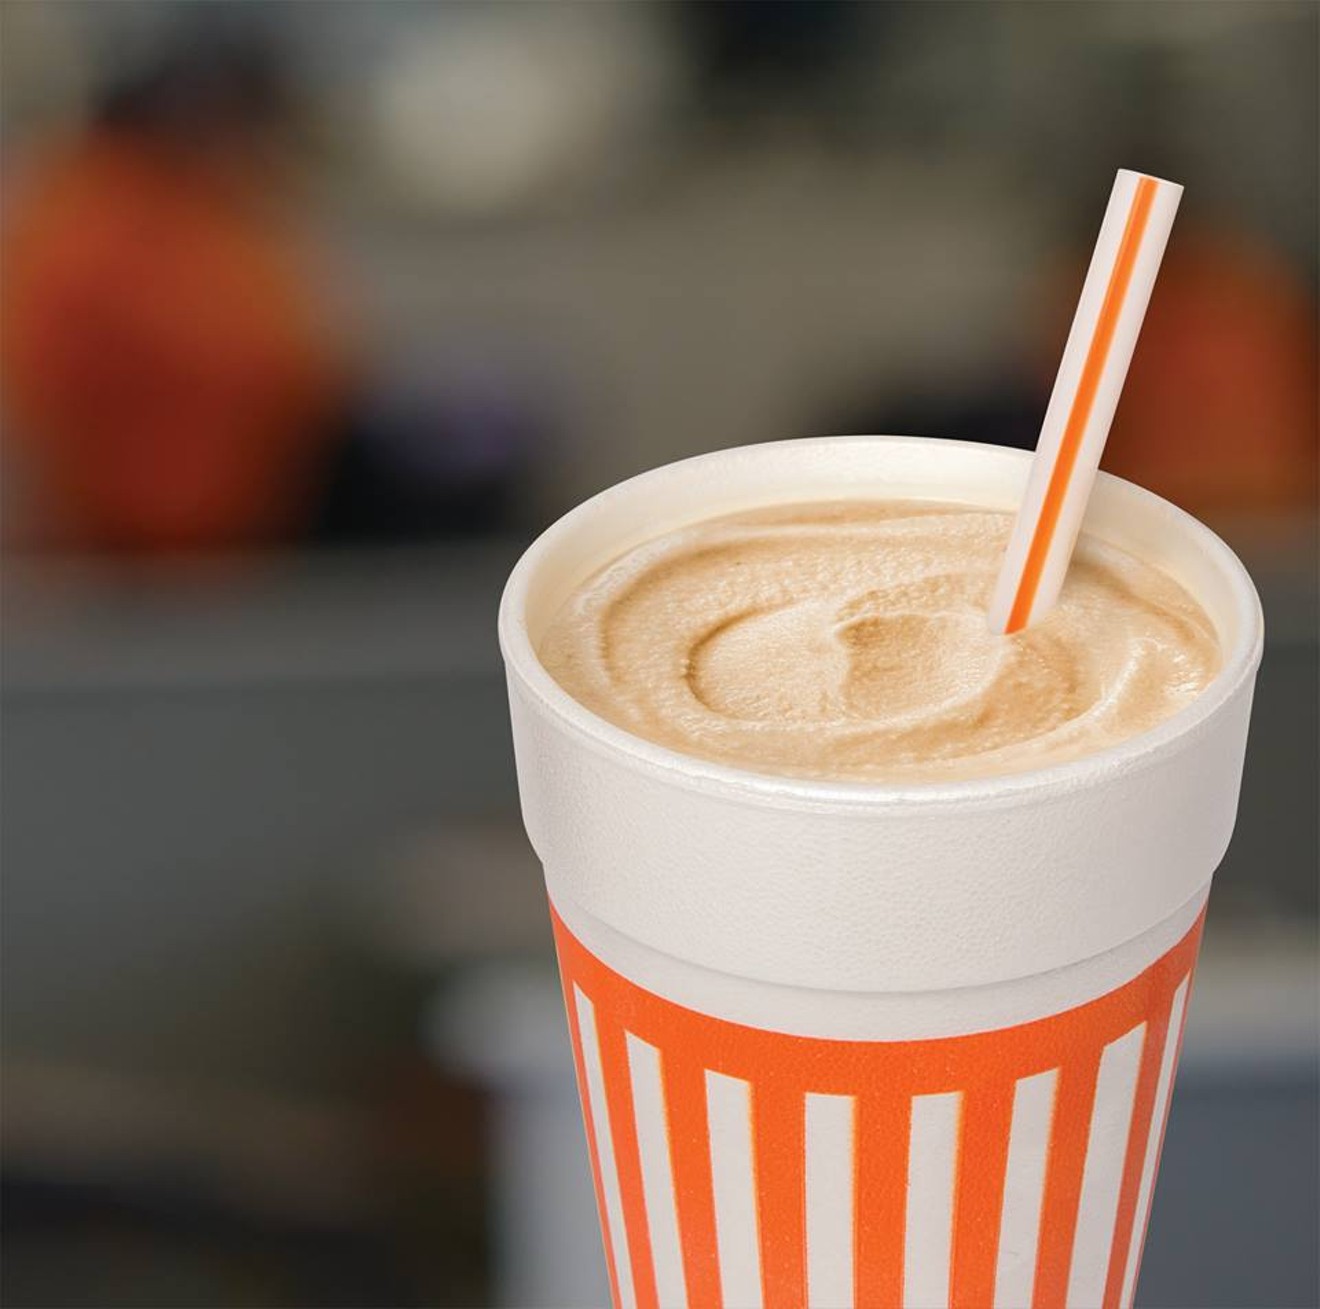 Whataburger's new coffee shake beats the hell out of a Frappuccino.